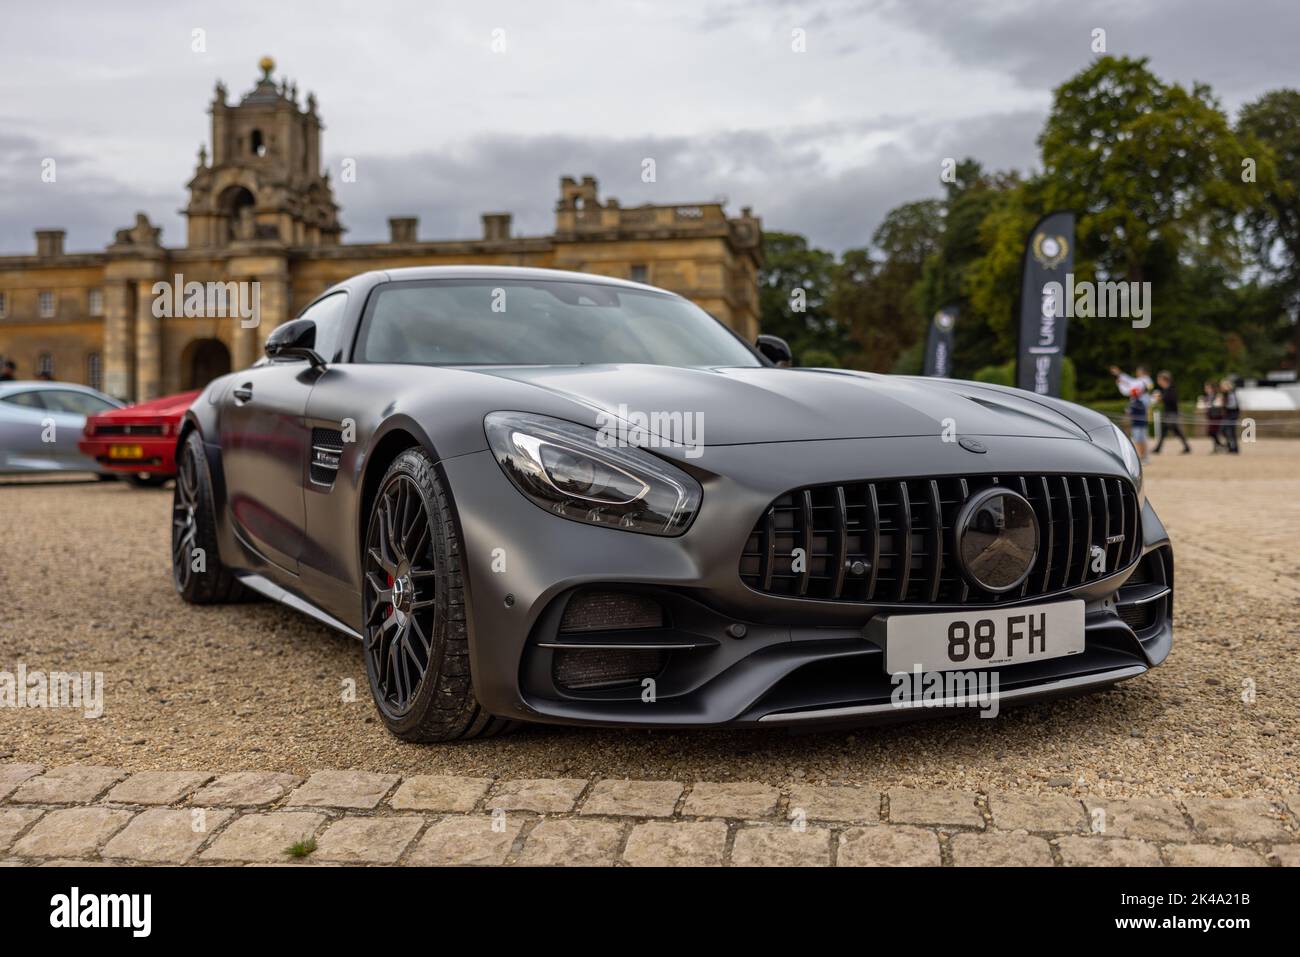 2017 Mercedes AMG GT C Coupe Edition 50 ‘88 FH’ on display at the Salon Privé Concours d’Elégance motor show held at Blenheim Palace Stock Photo